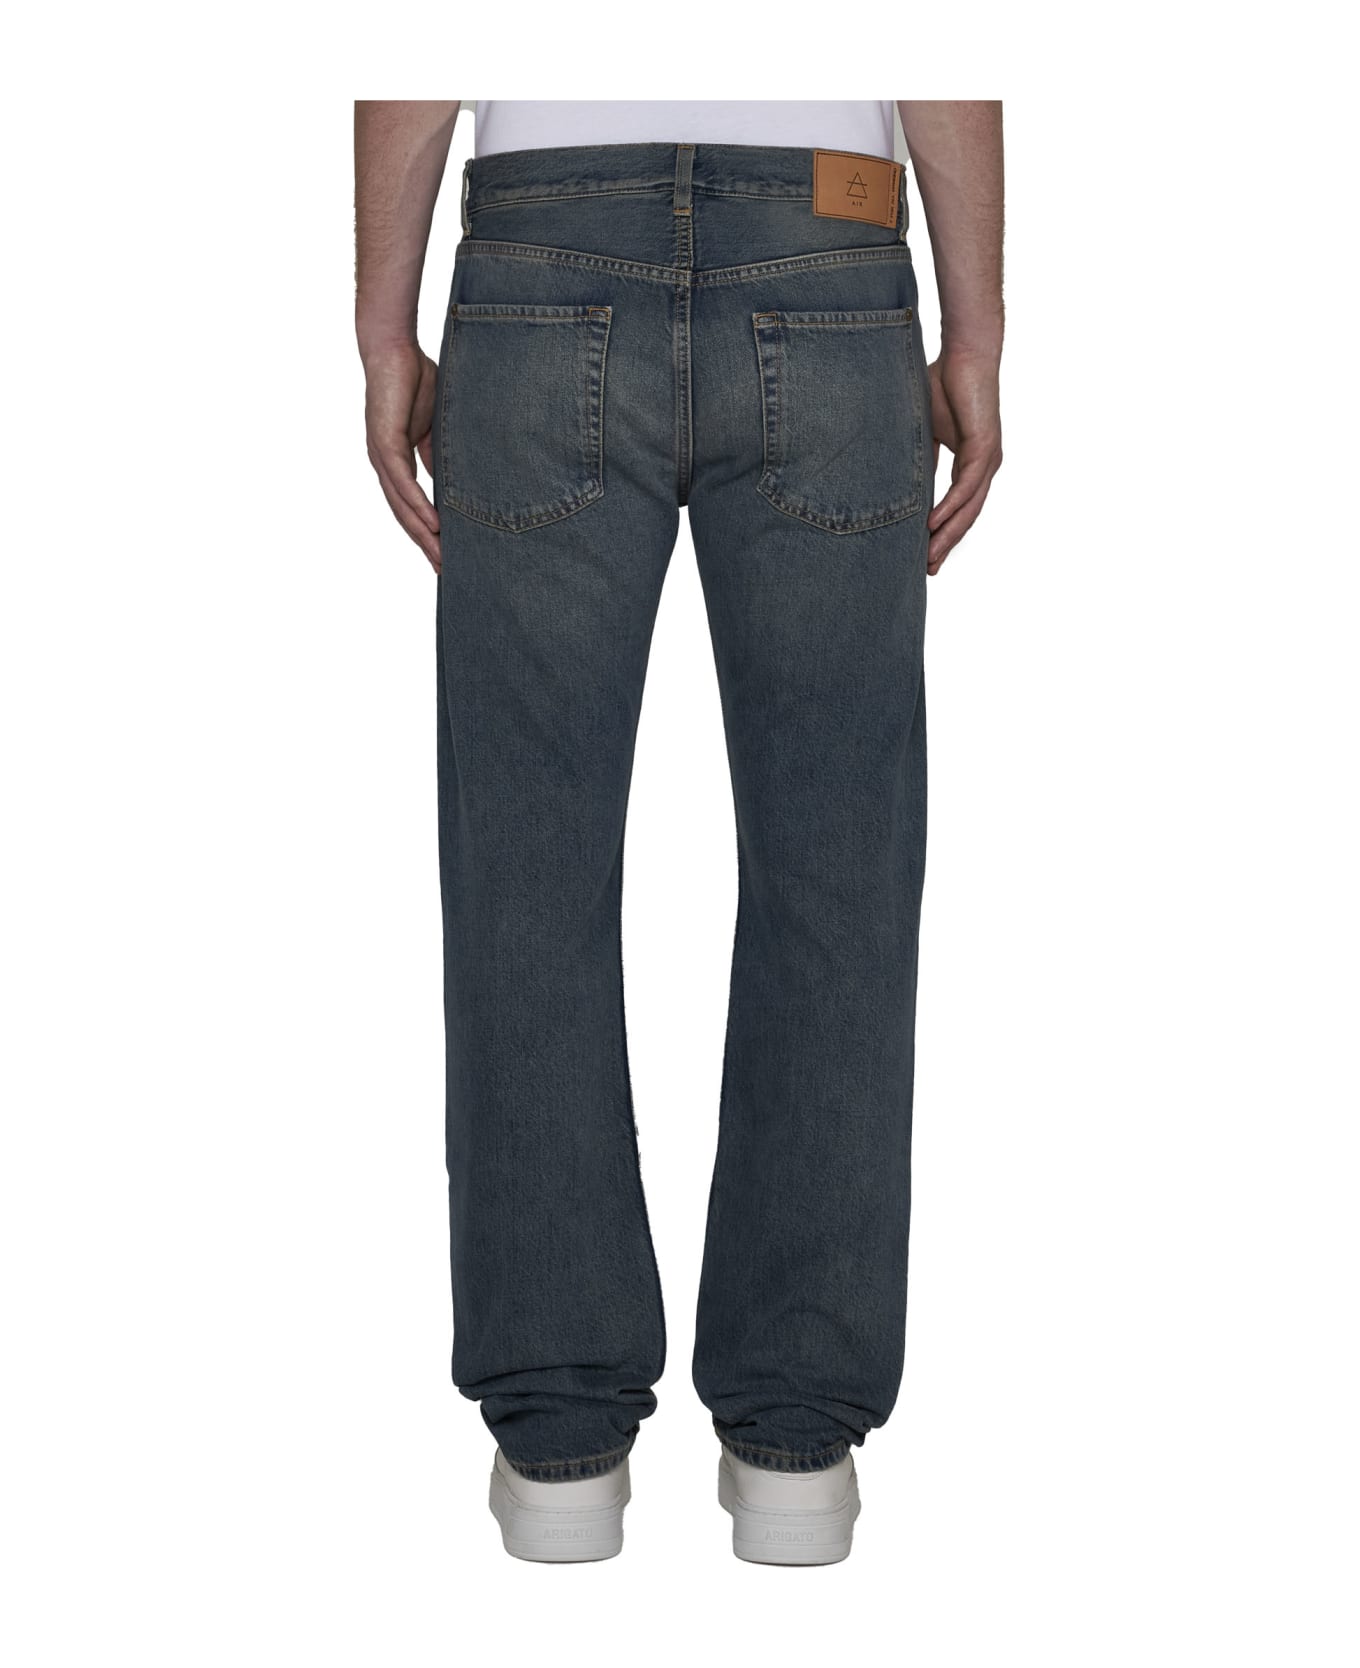 7 For All Mankind Jeans - Mid blue